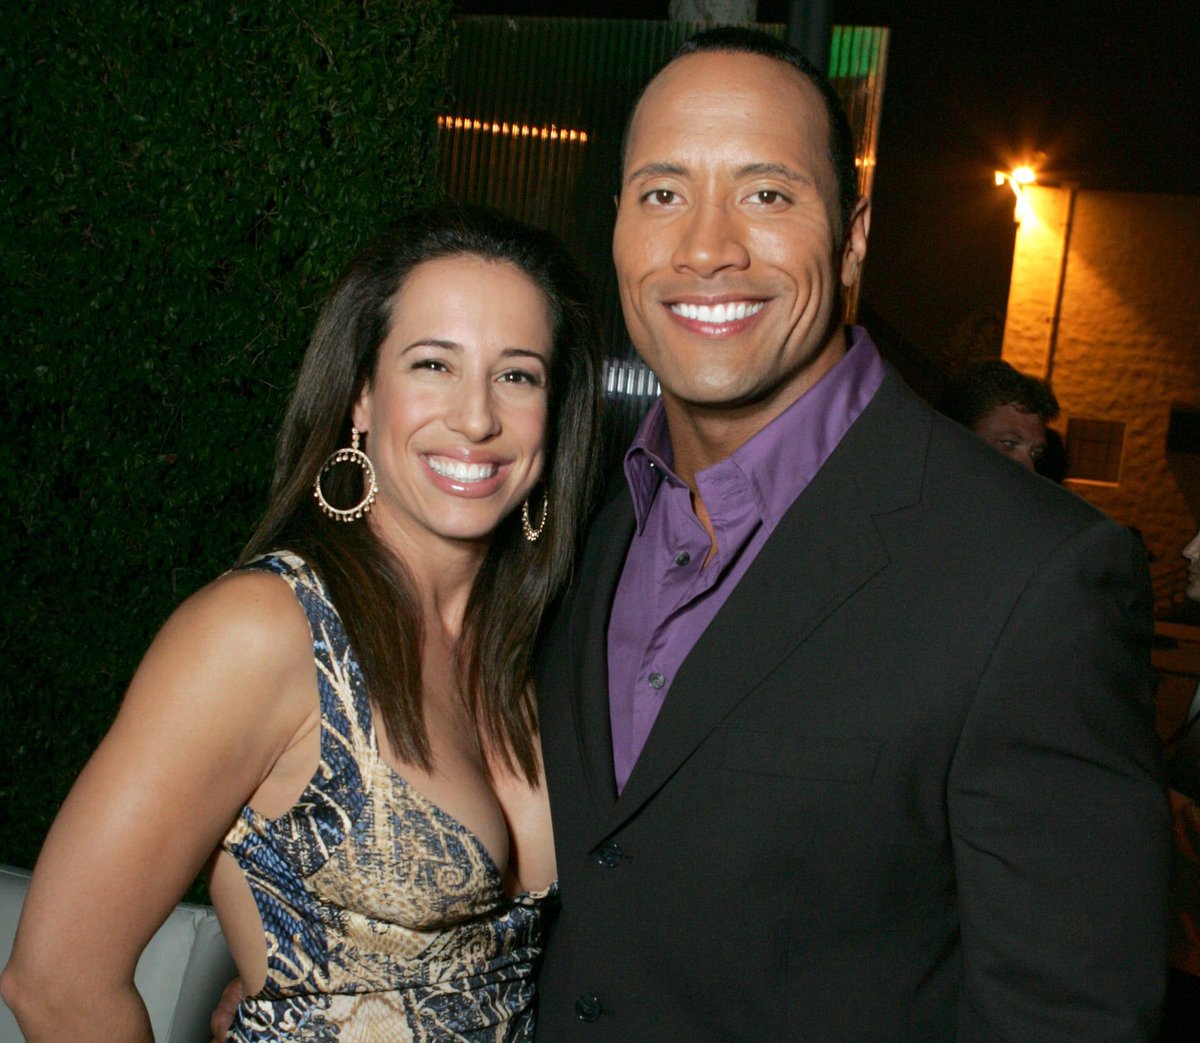 After Dwayne Johnson split with his now ex-wife Dany Garcia, he made her hi...